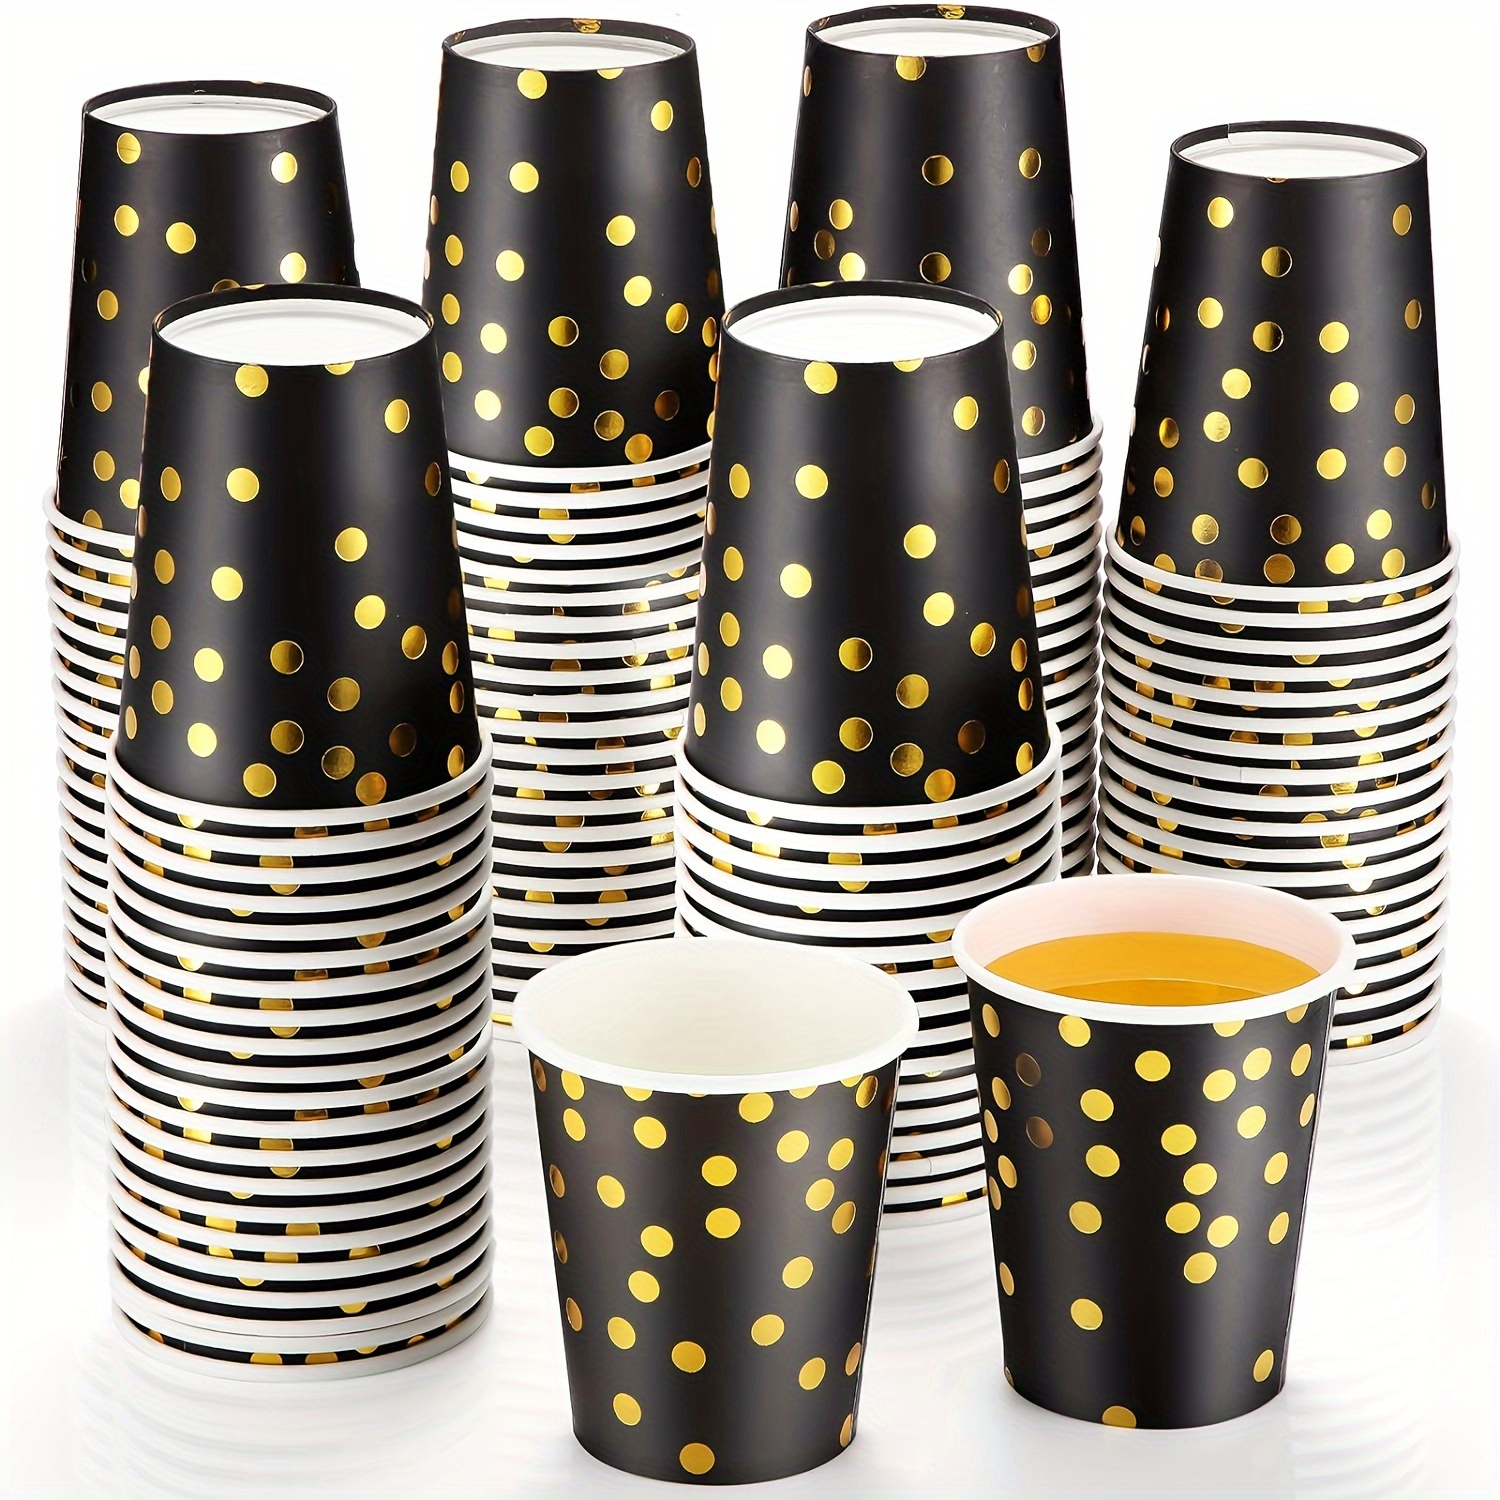 

20pcs, Paper Cups/ Straws, 9oz Disposable Coffee Cups For Hot Or Cold Drinks, Creative Pattern Paper Straw, Wedding Anniversary Party Supplies